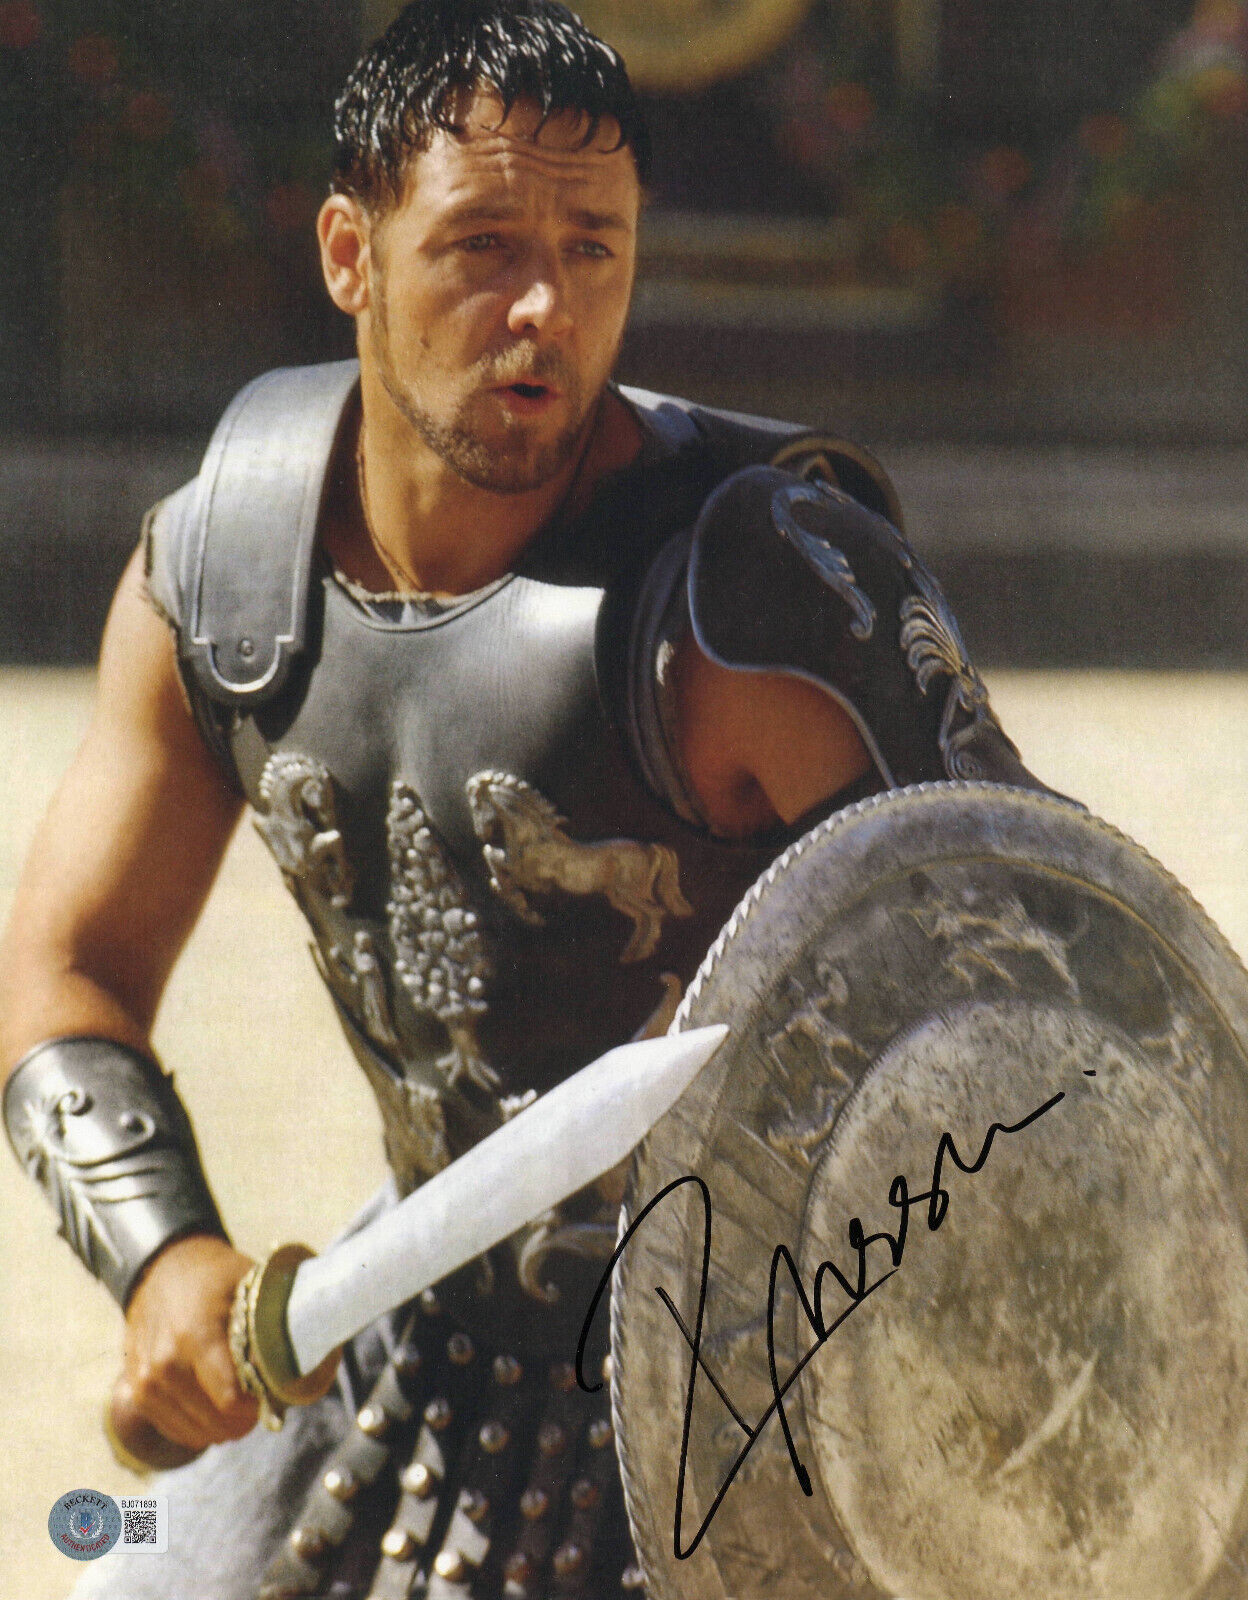 RUSSELL CROWE SIGNED AUTOGRAPH GLADIATOR 11X14 PHOTO BECKETT BAS